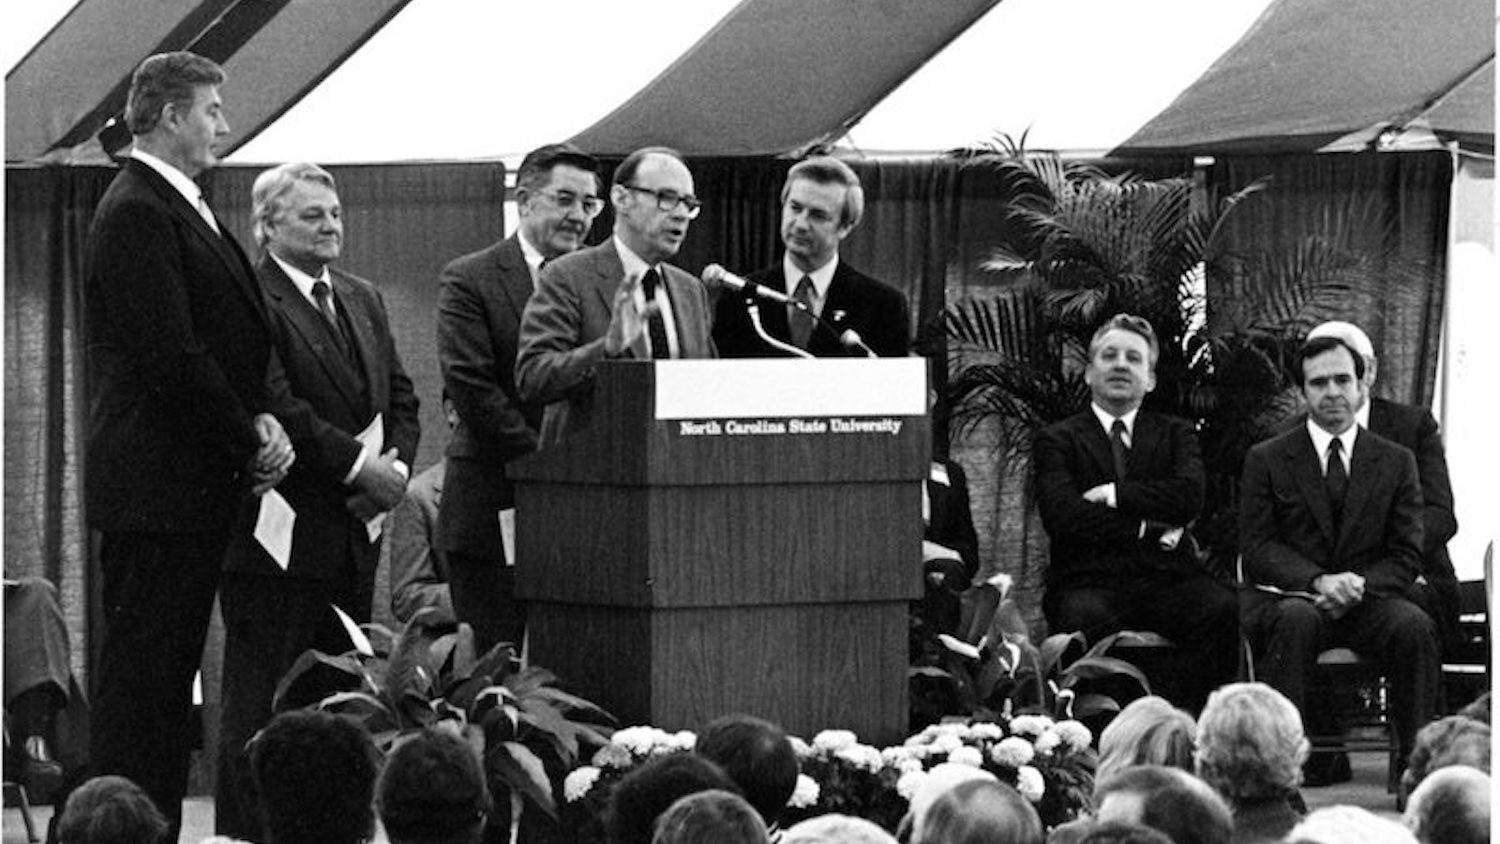 Founding dean Terry Curtin speaks during the CVM's dedication ceremony, 1983. University Archives Photograph Collection.